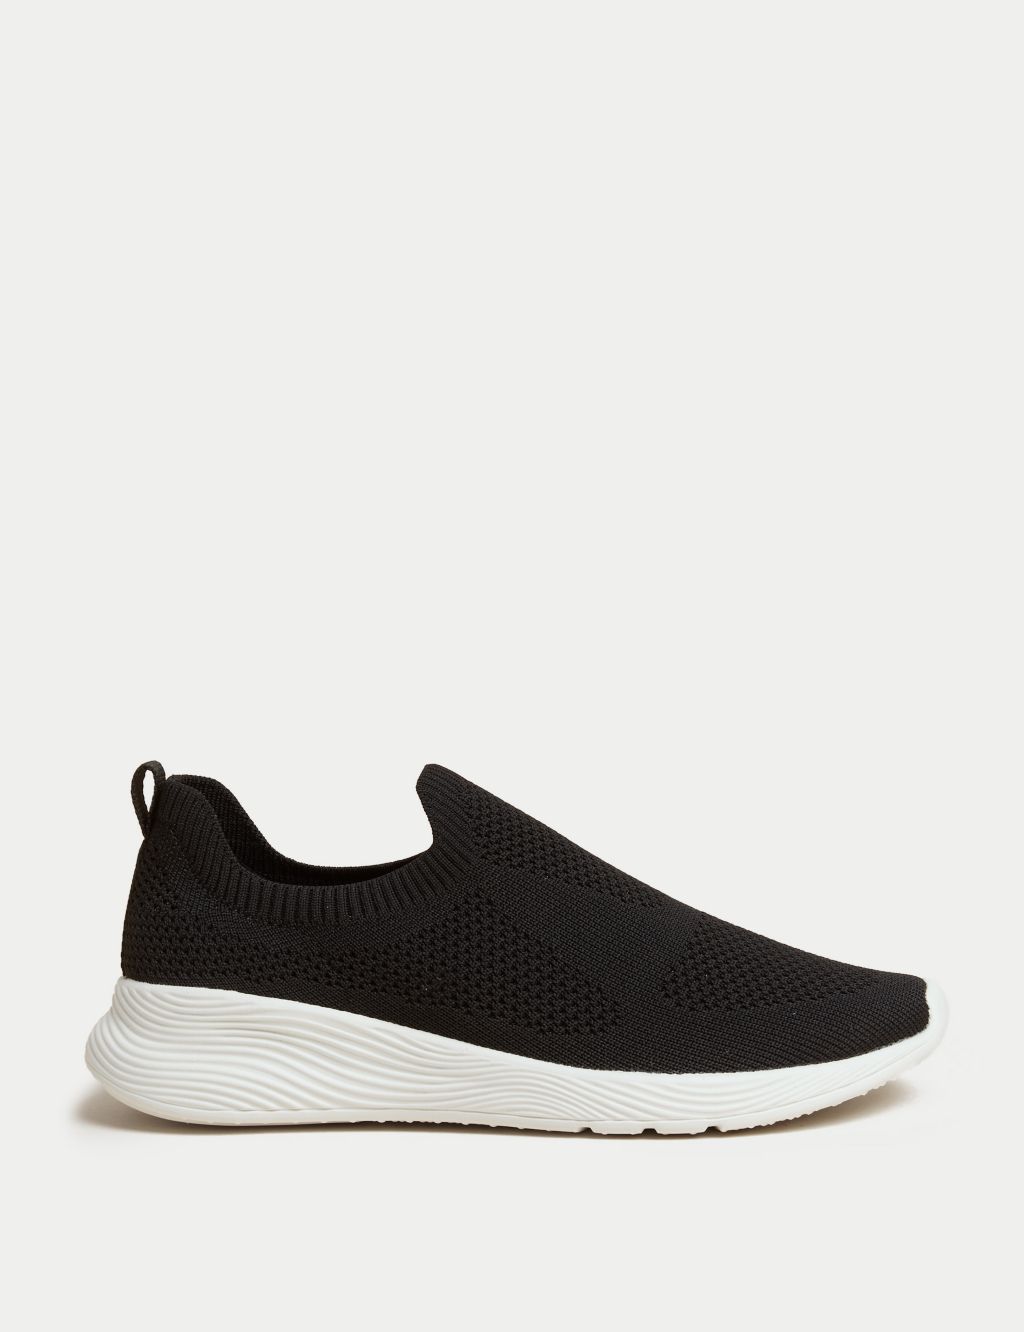 Knitted Slip On Trainers image 1